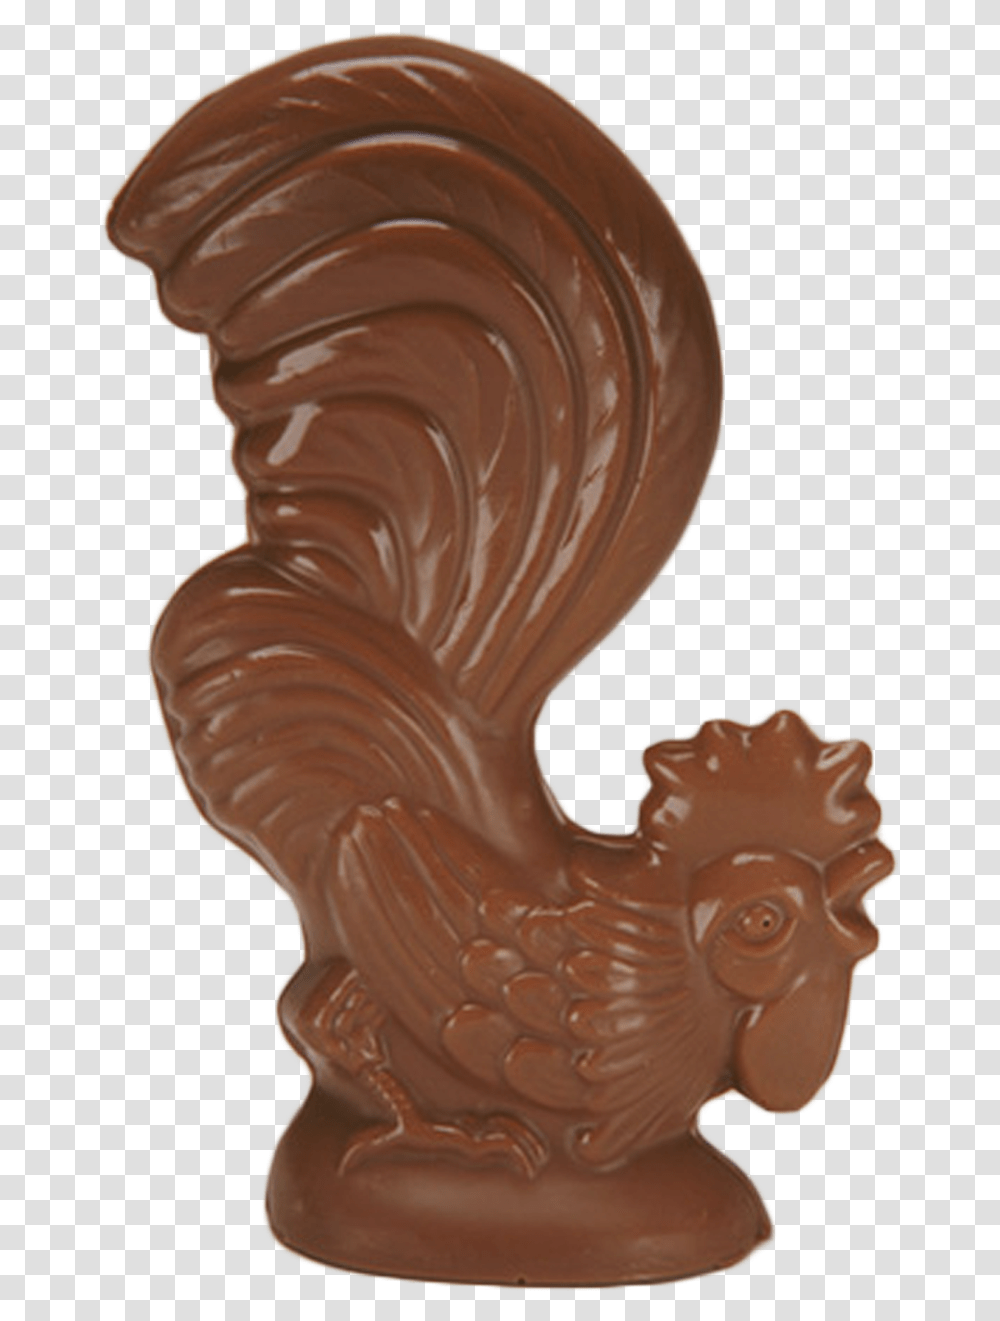 Chocolate Fantail Rooster Is Available In Milk Amp Orange Rooster, Sweets, Food, Confectionery, Architecture Transparent Png